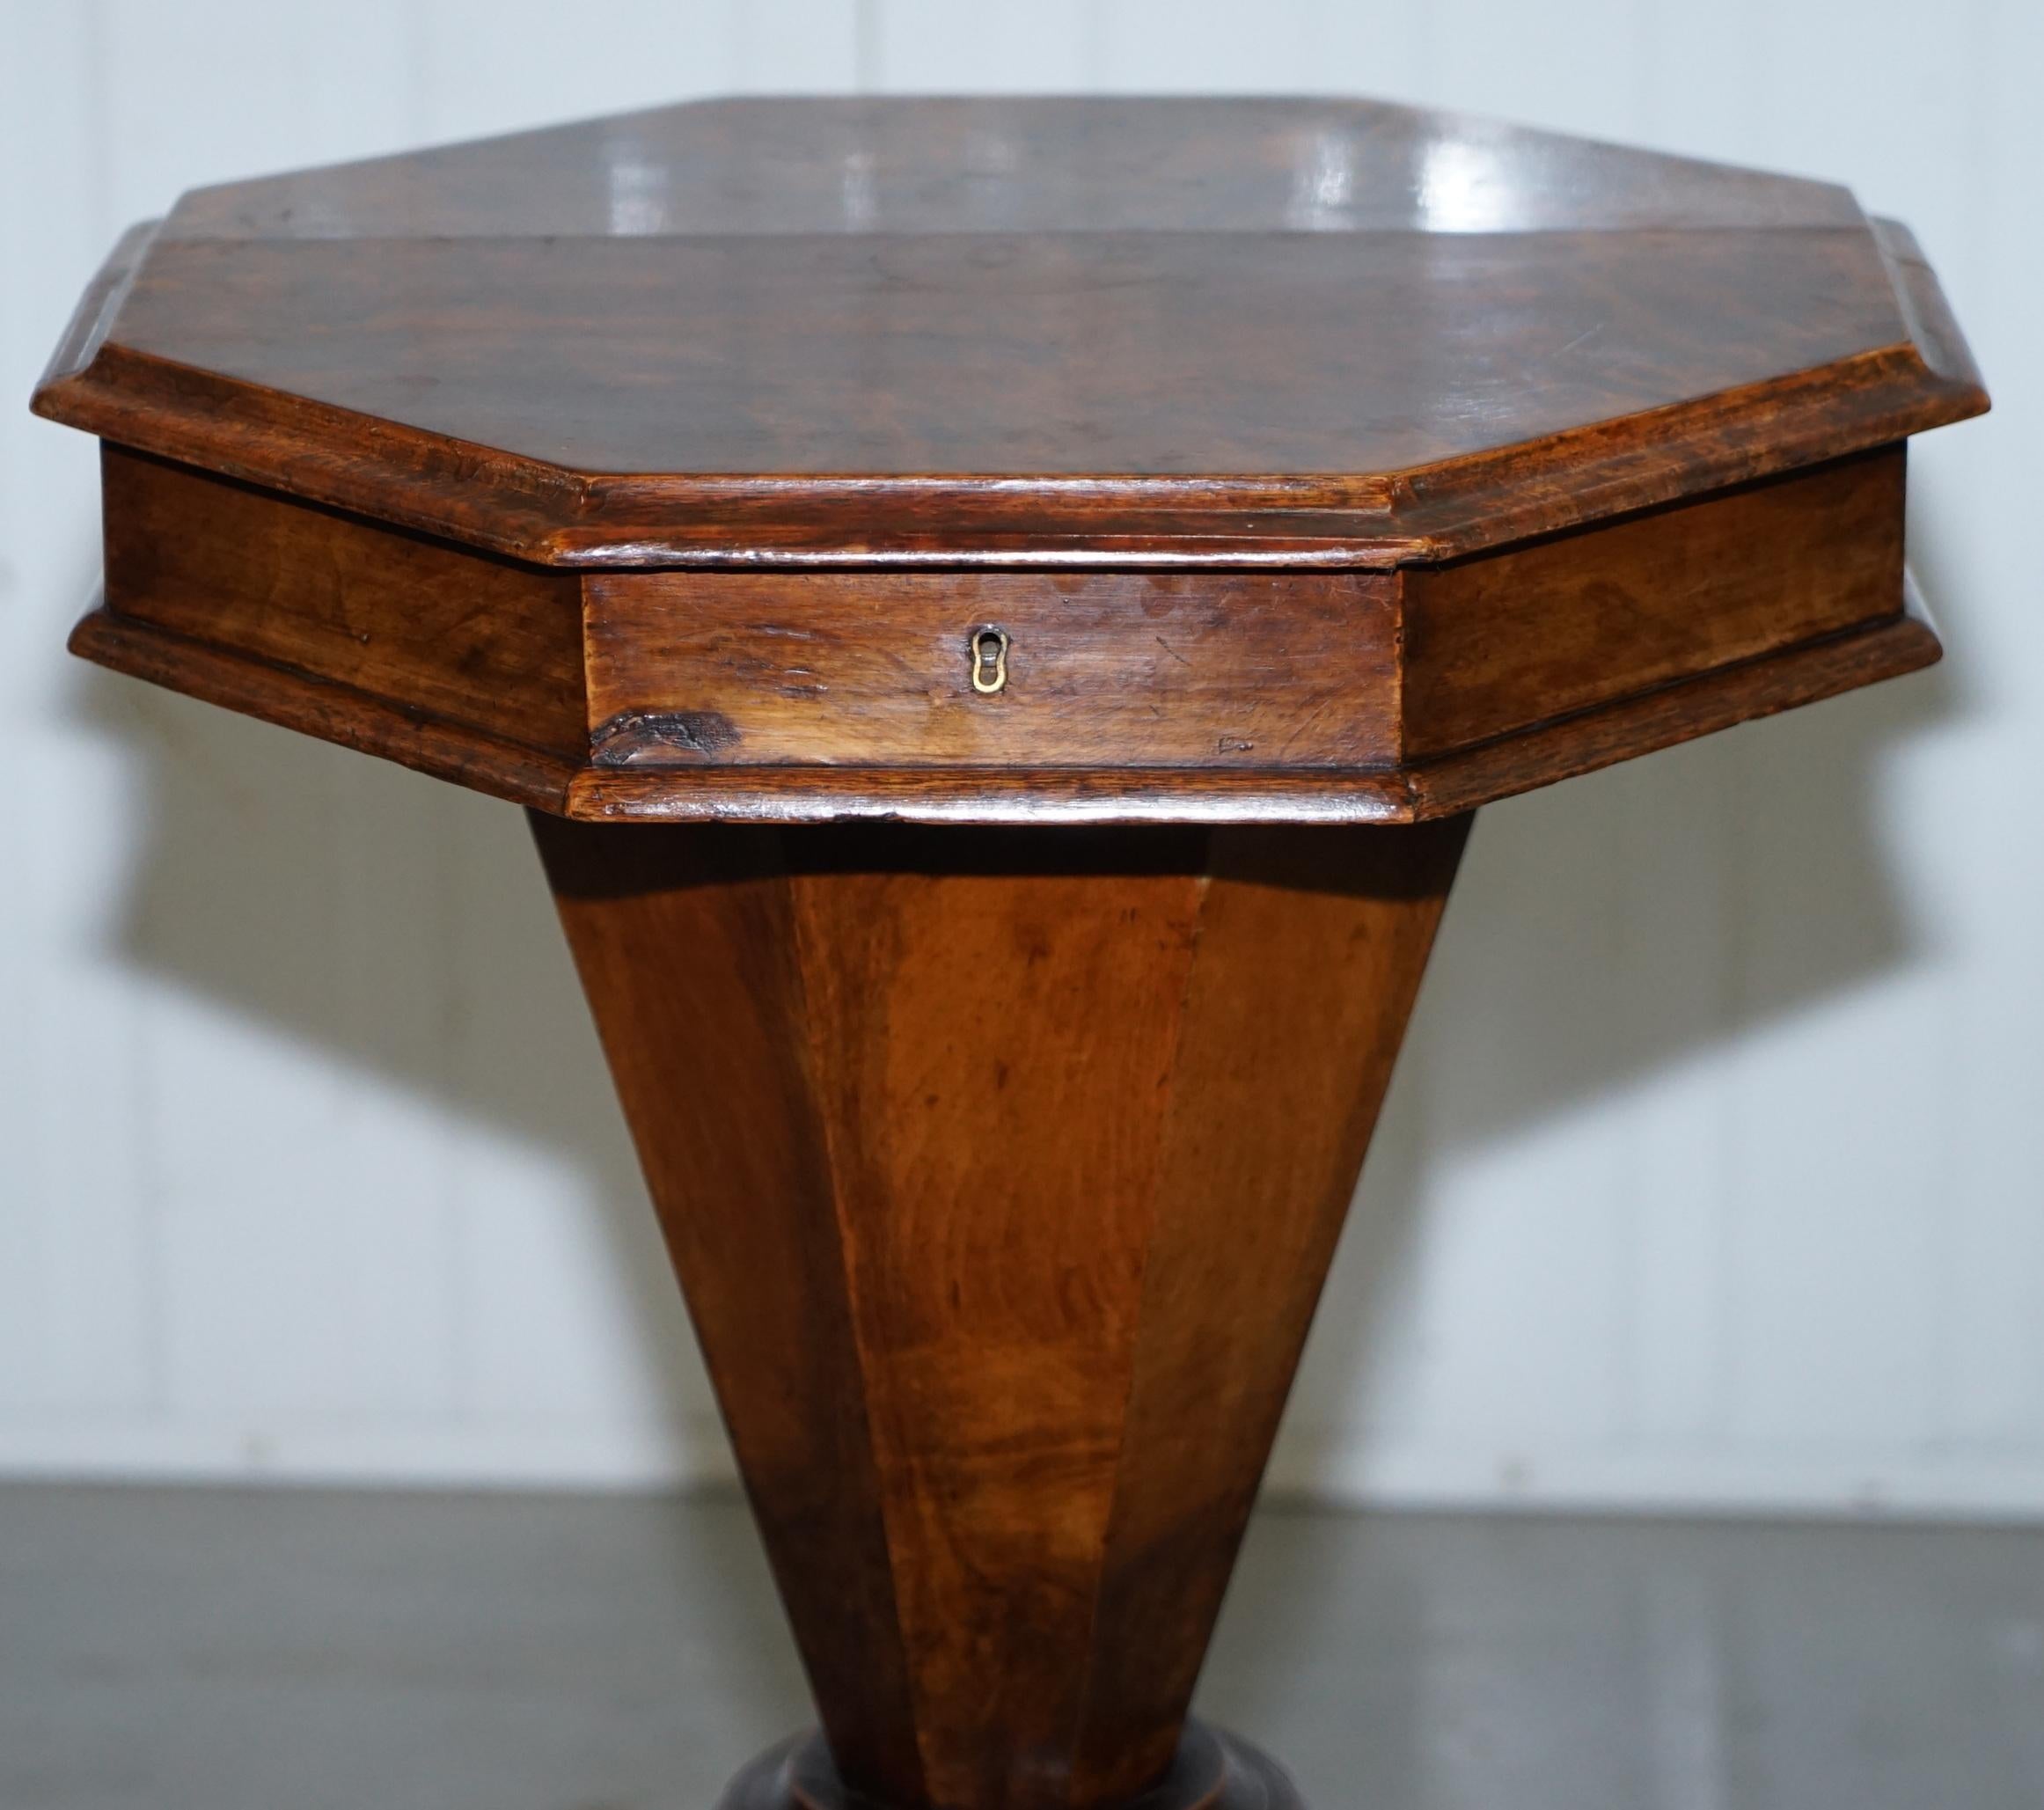 19th Century Stunning Burr Walnut Victorian Sewing or Work Box Great as Side Lamp End Table